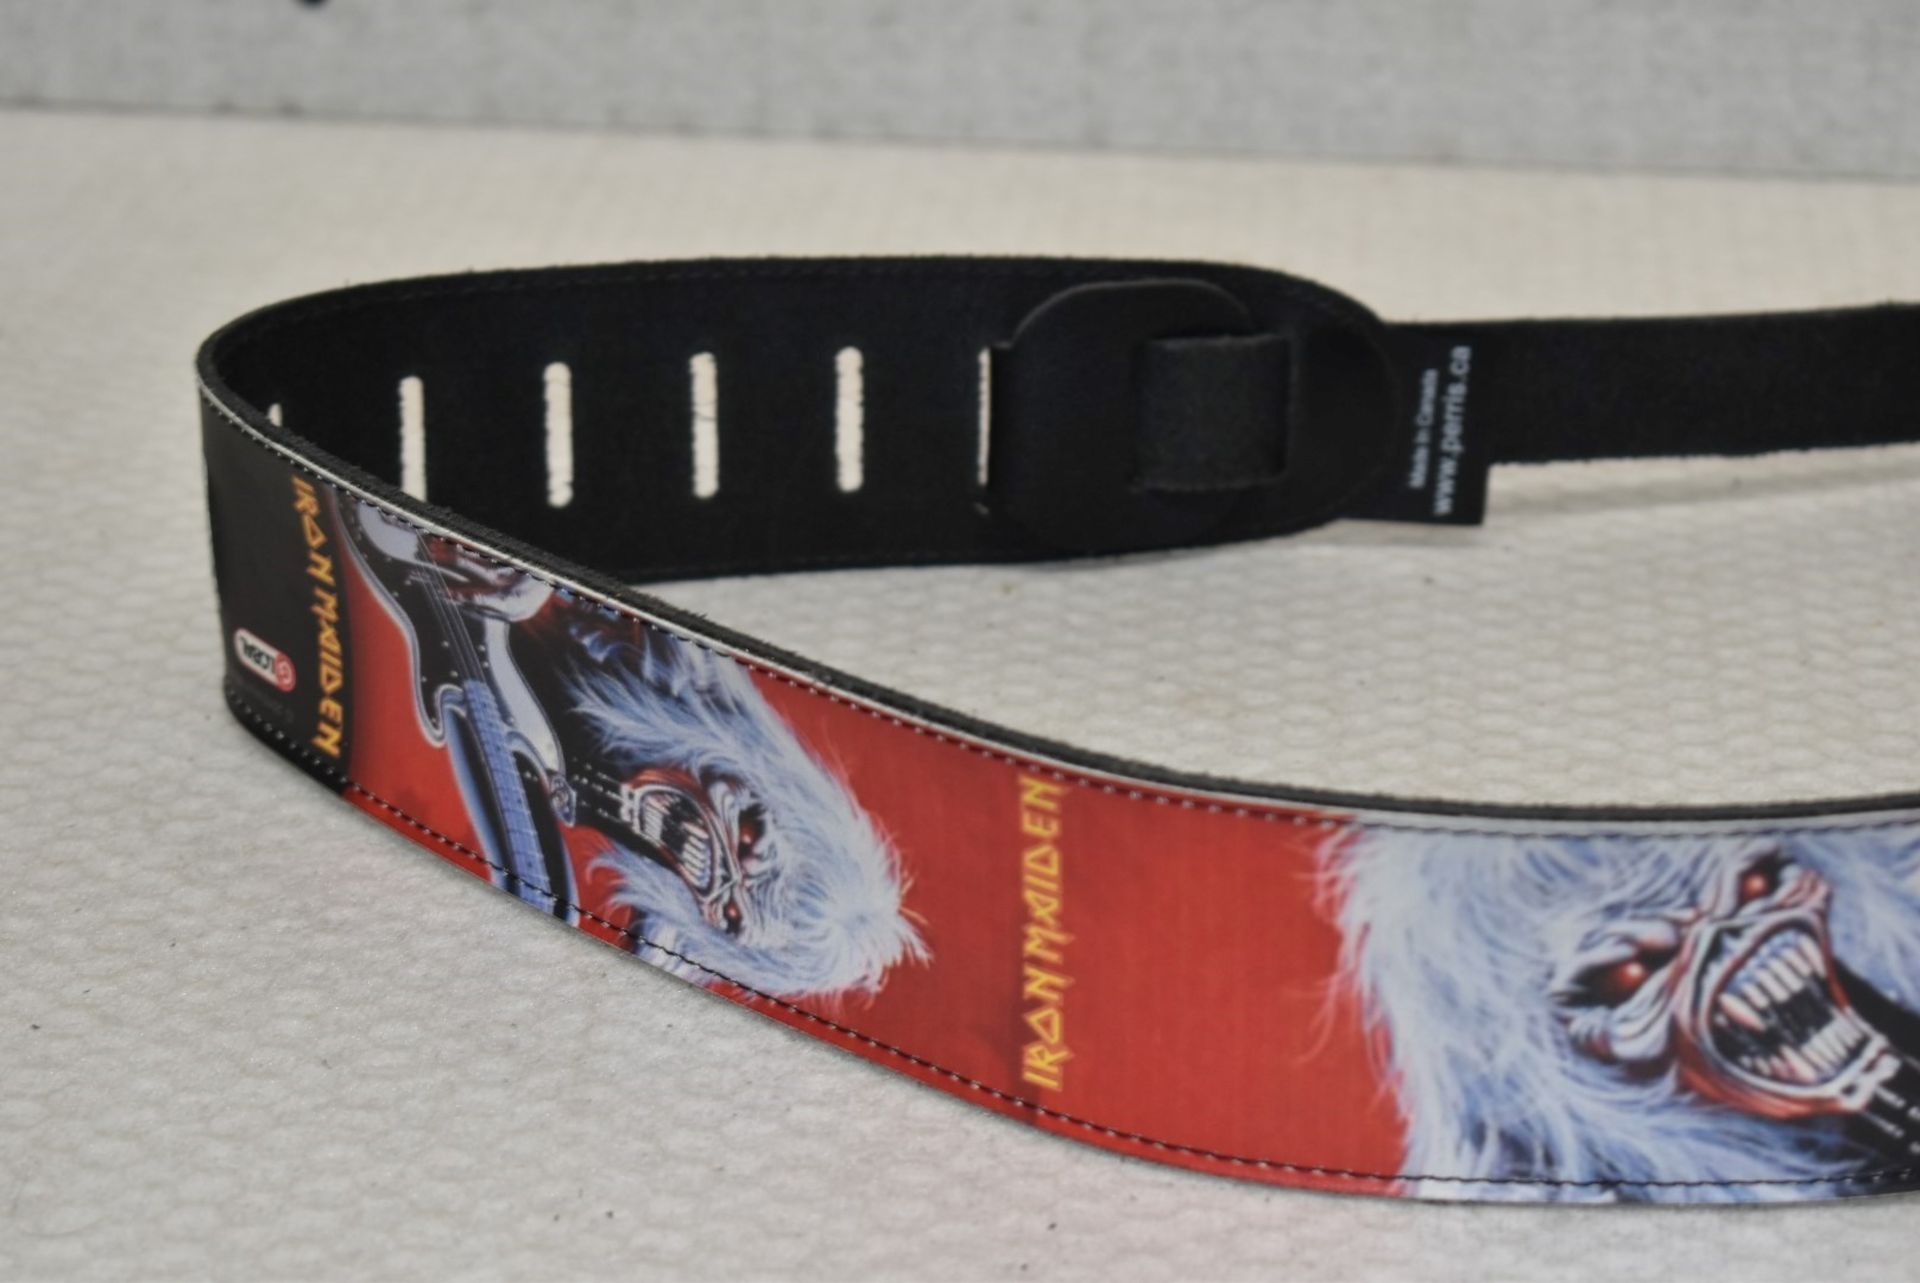 1 x Iron Maiden Leather Guitar Strap by Perri's - Officially Licensed Merchandise - RRP £40 - New & - Image 4 of 9